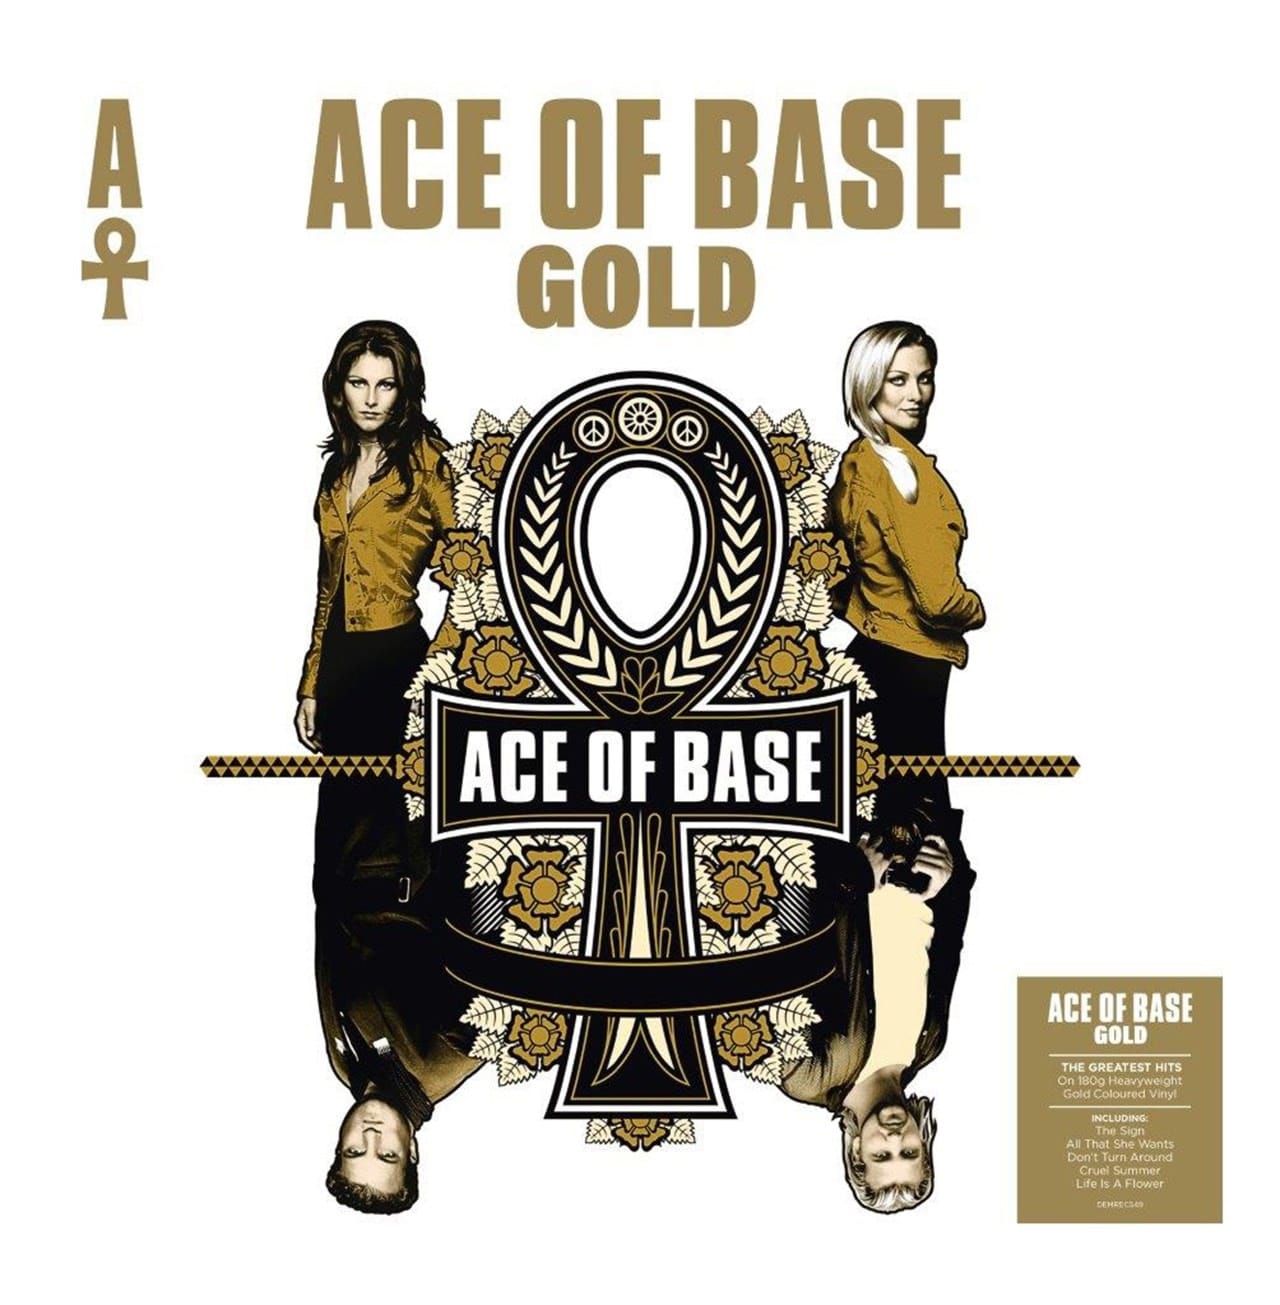 Ace Of Bass - GOLD